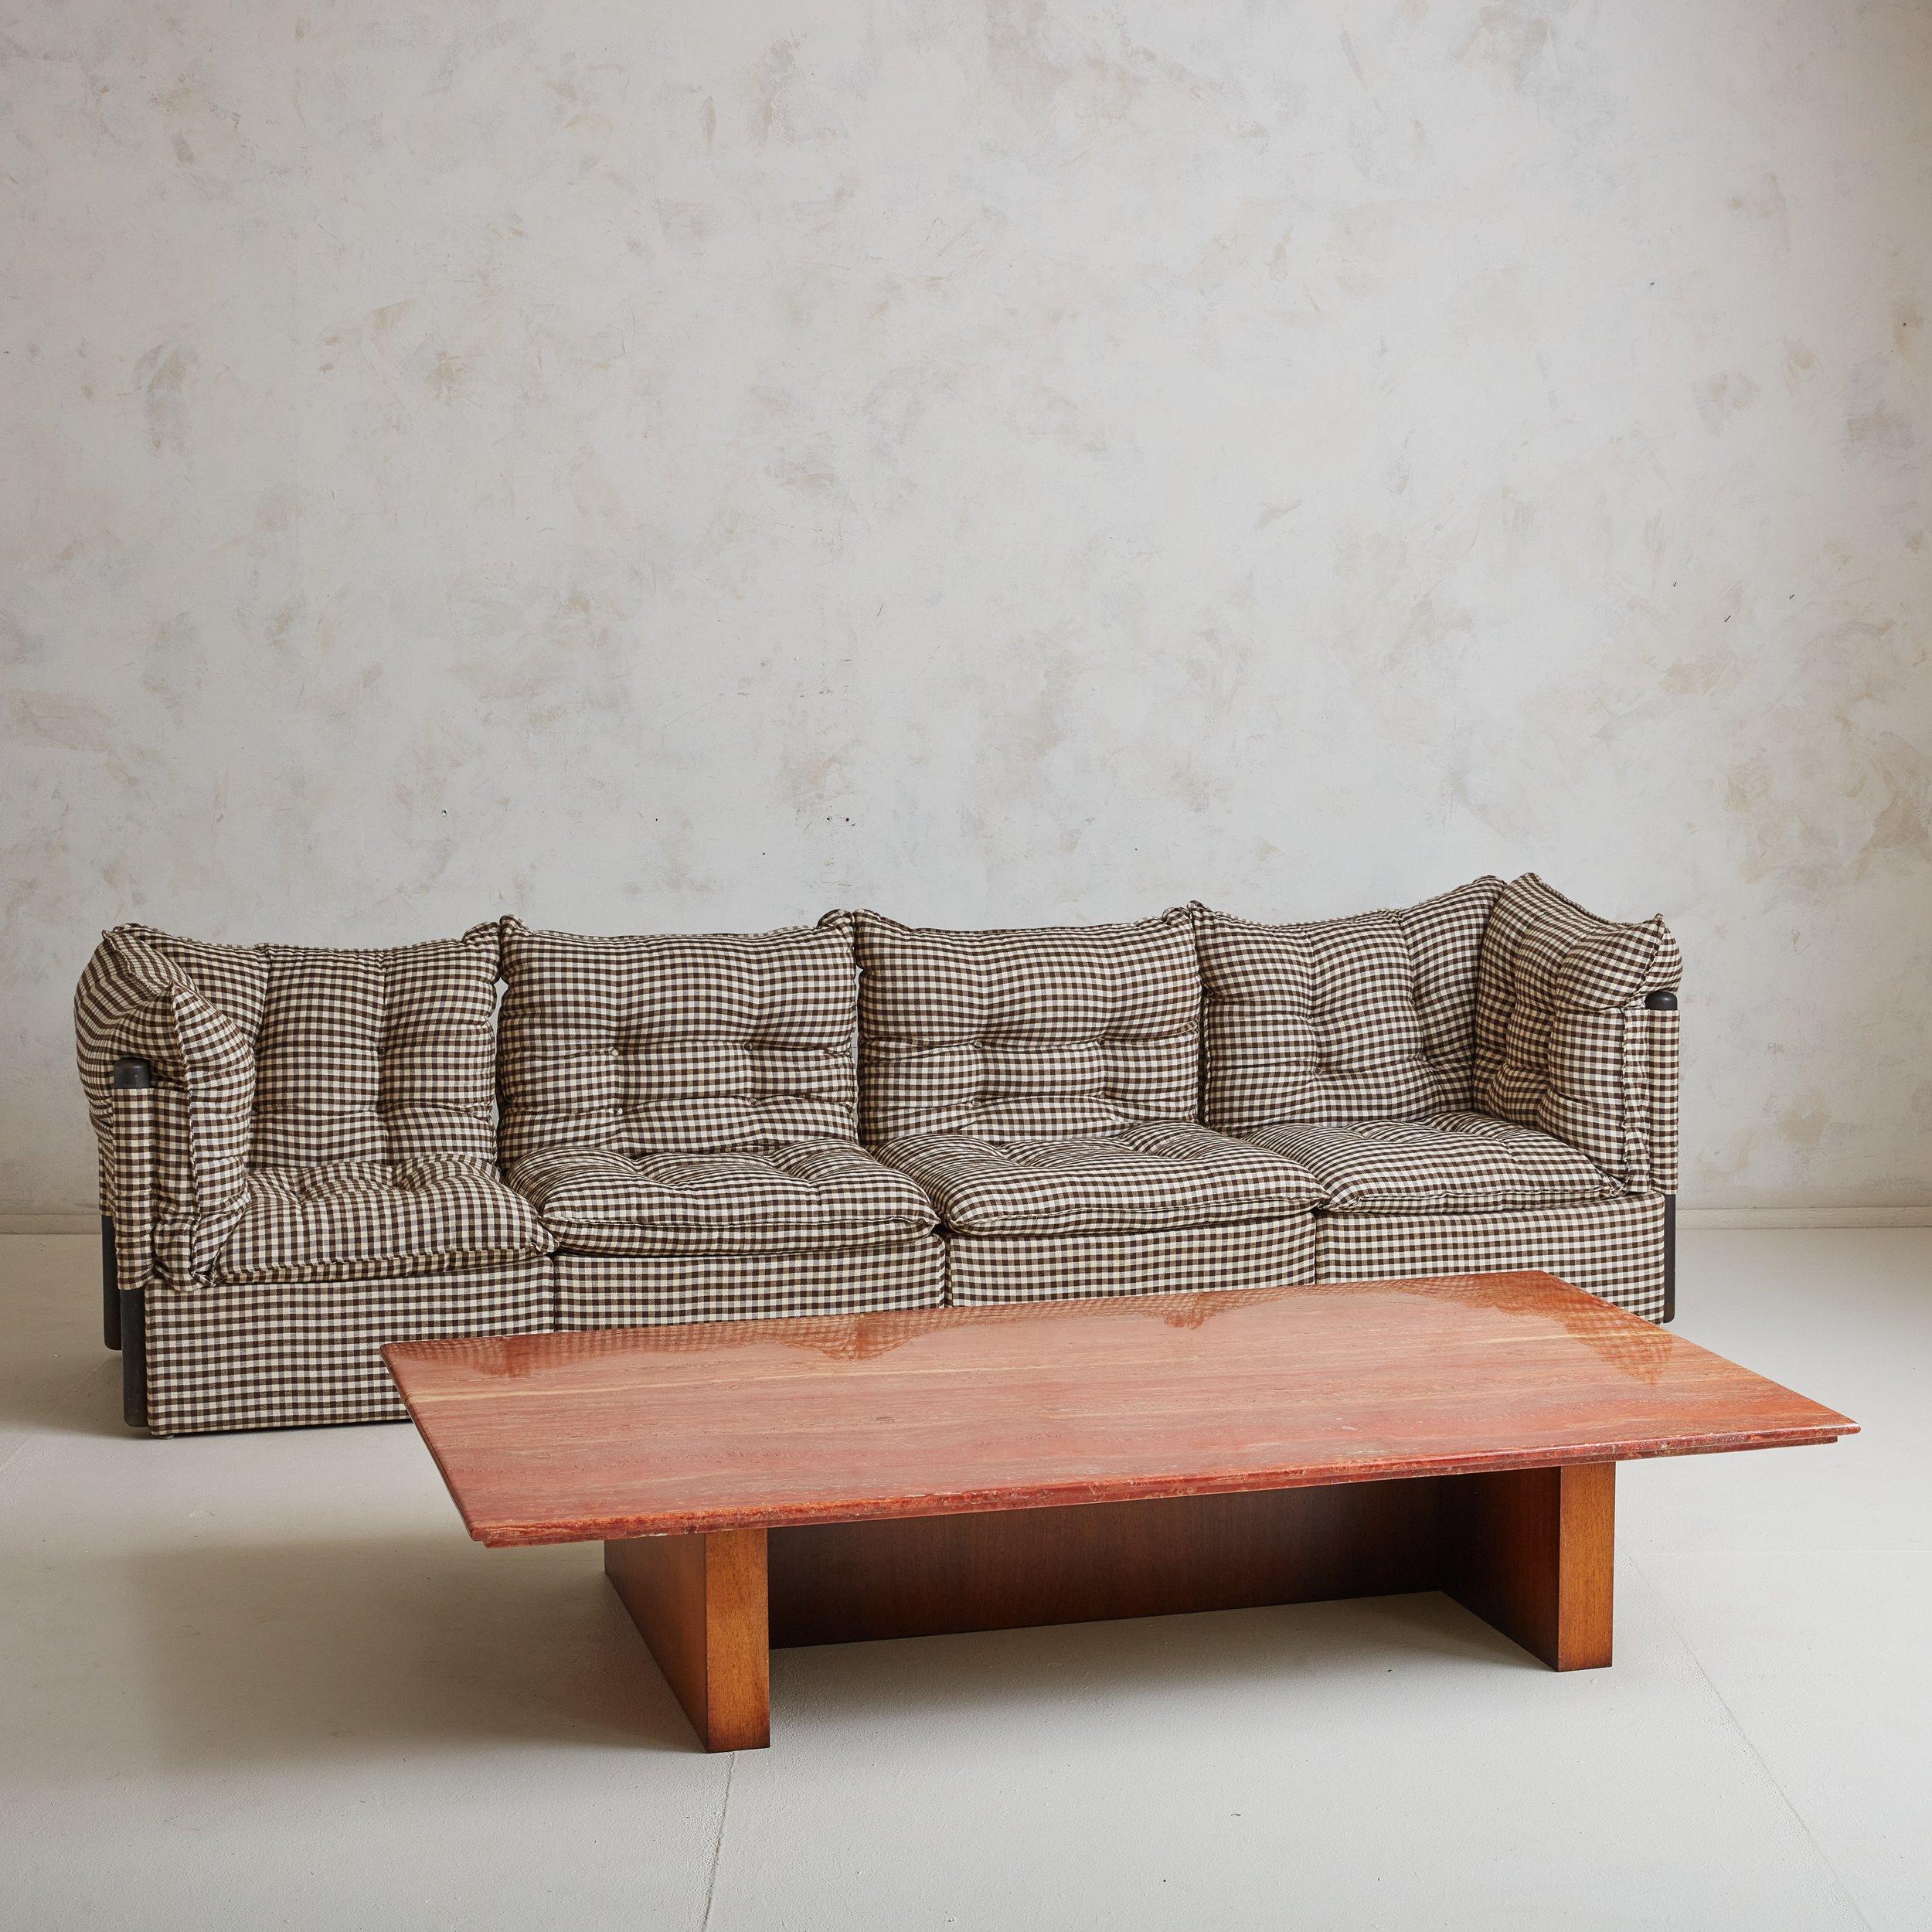 Belgian Modern Red Travertine Coffee Table with Wood Base, Belgium 1970s For Sale